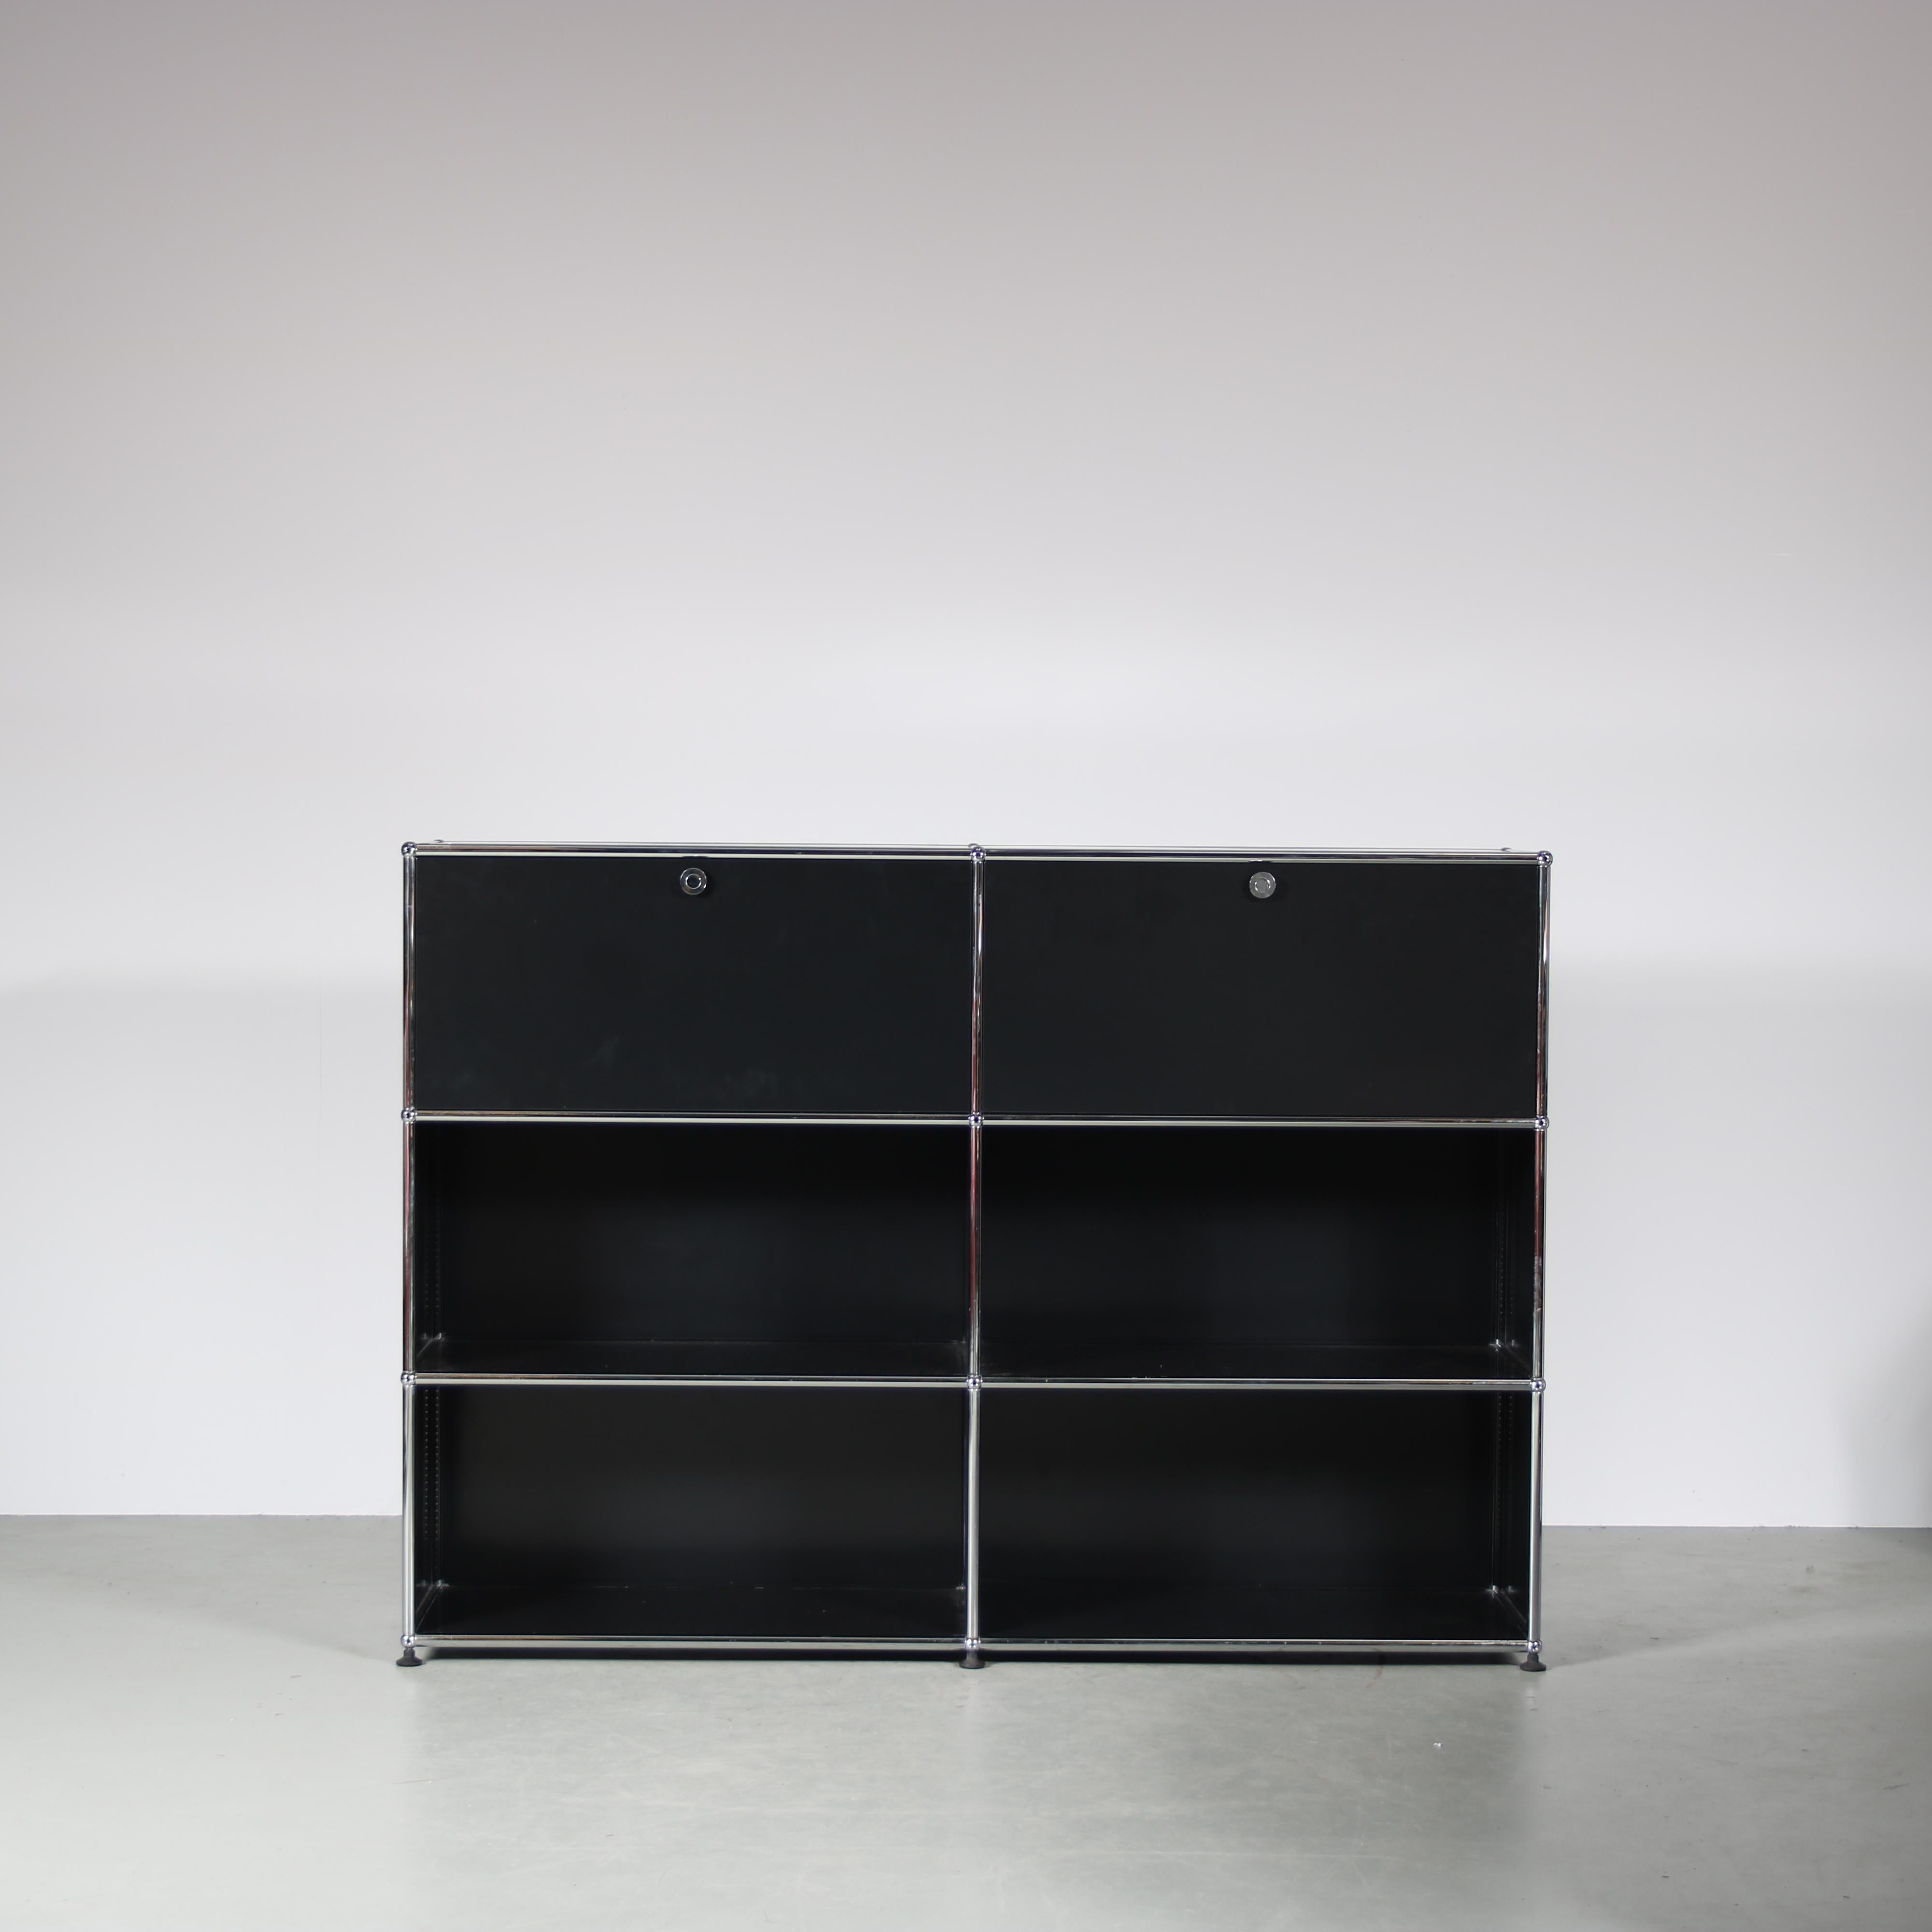 

This large chrome and black metal cabinet is a 1980s design by Paul Schaerer and Fritz Haller, produced by USM in Switzerland.

The cabinet is 2 units wide and 3 units high, providing ample storage space for any modern living or working